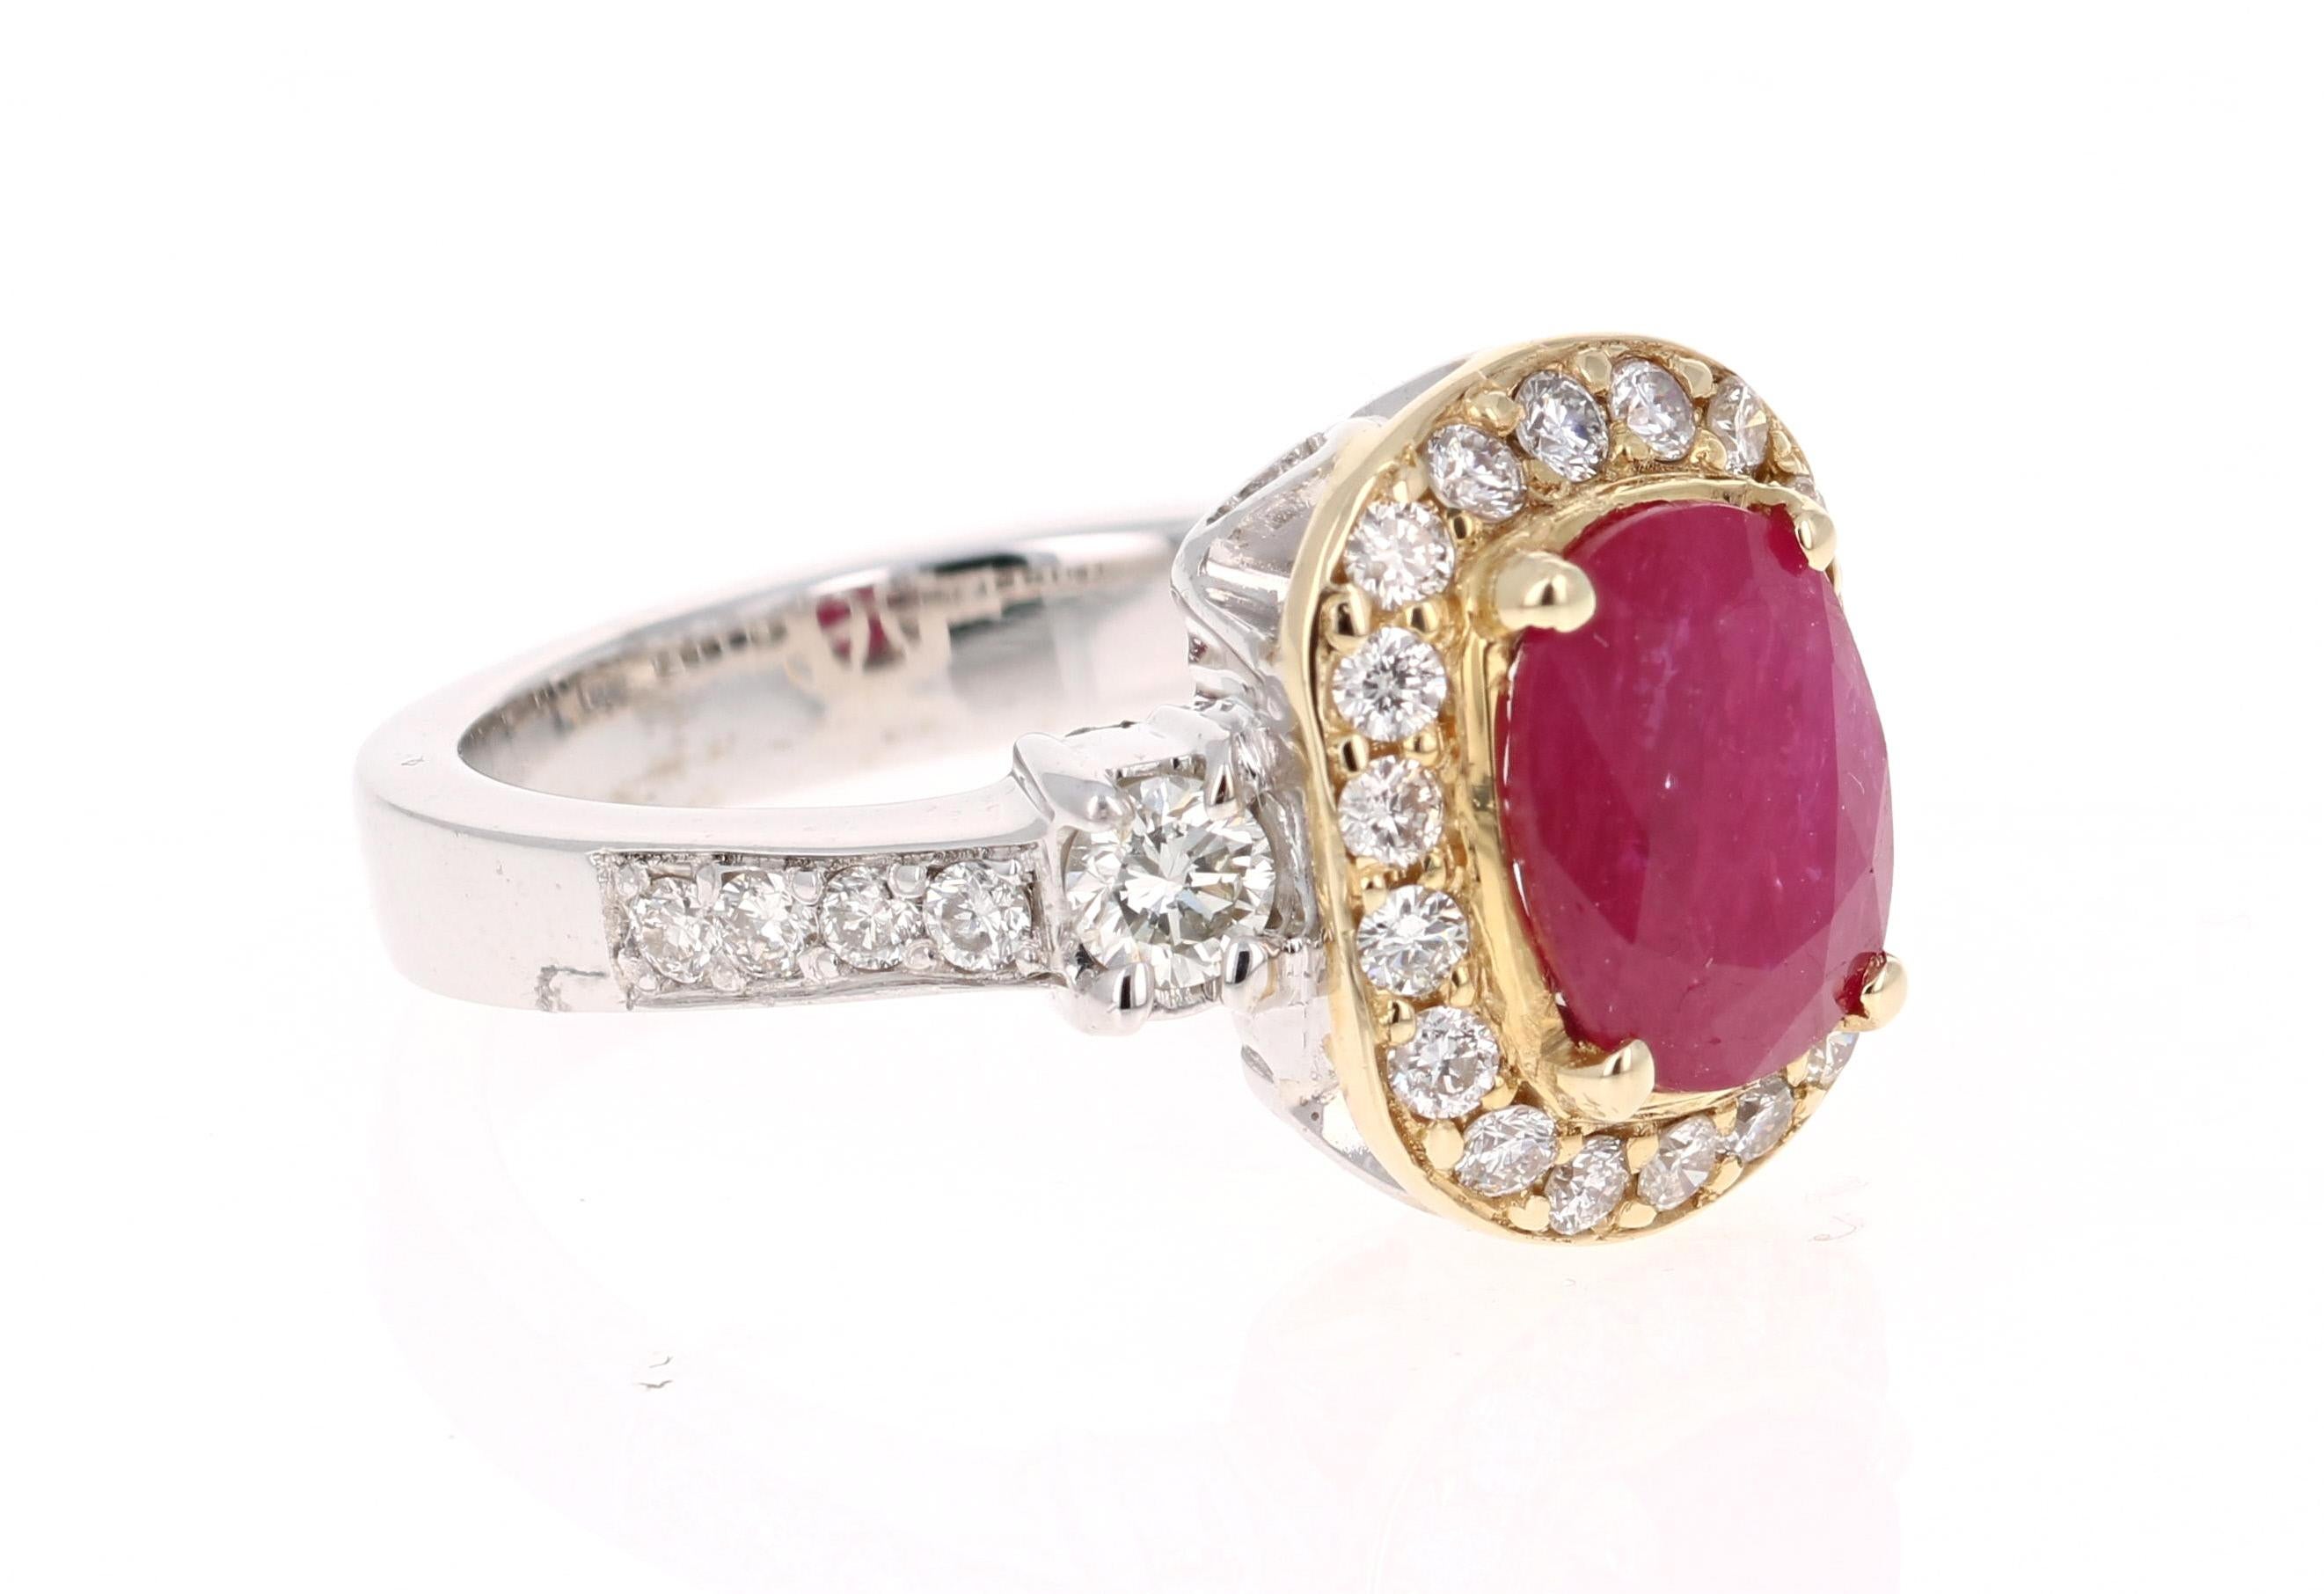 2.78 Carat Ruby and Diamond Bridal Ring in 14K White Gold!

This ring has a beautiful Natural Oval Cut Ruby that weighs 2.03 Carats and is surrounded by 28 Round Cut Diamonds that weigh 0.75 carats.  The total carat weight of the ring is 2.78